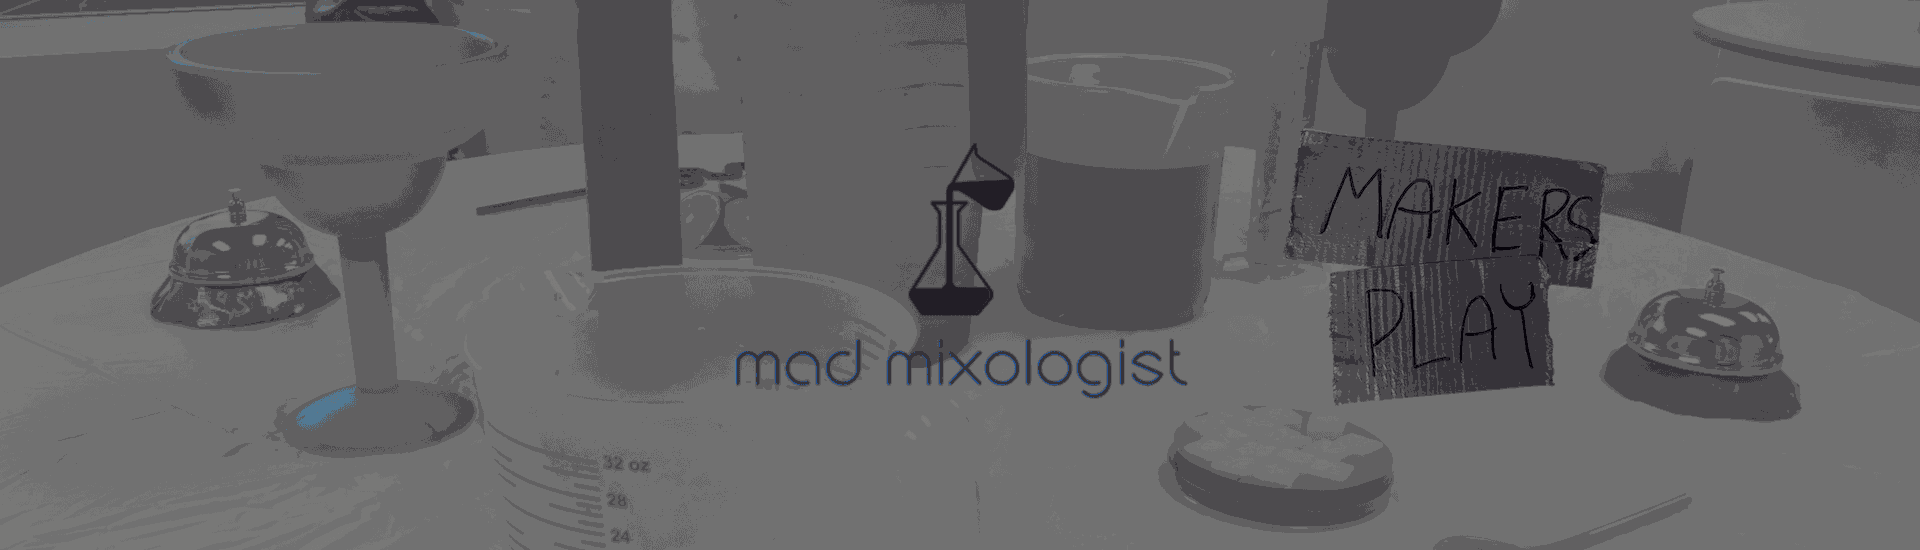 Mad Mixologist Featured at Makers Play Showcase